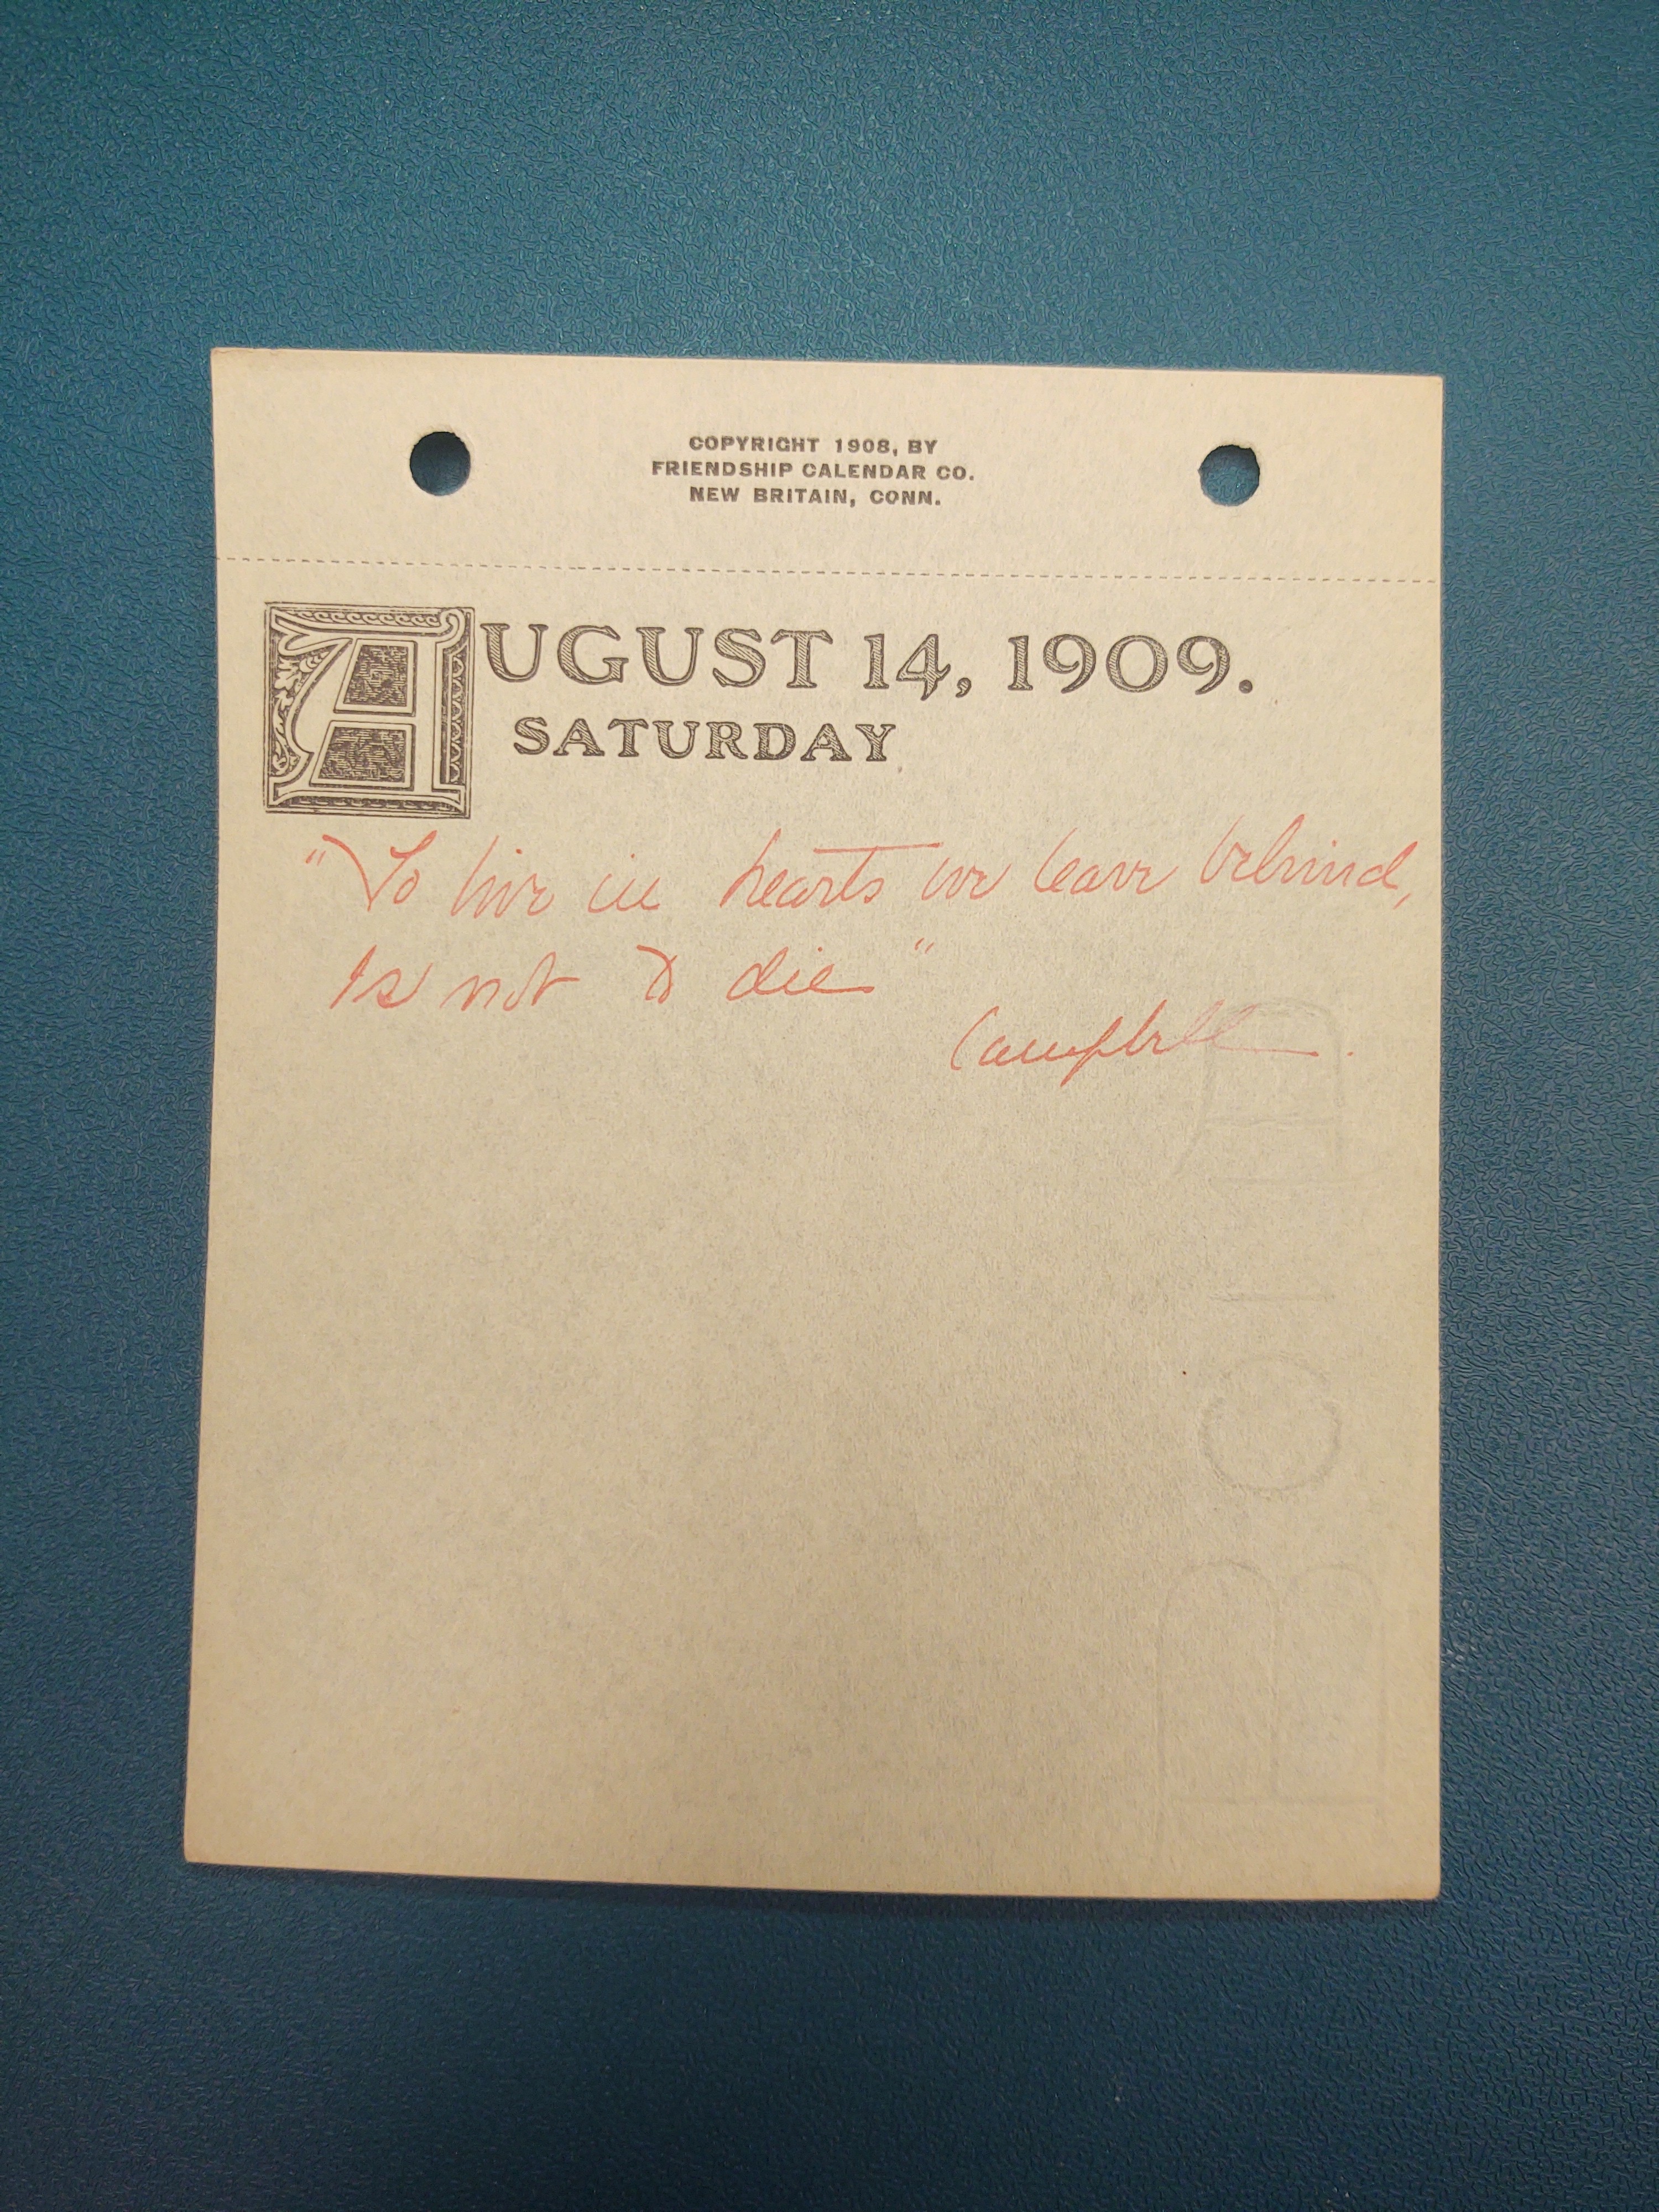 August 14, 1909. Saturday: There is no image here, just red pen.